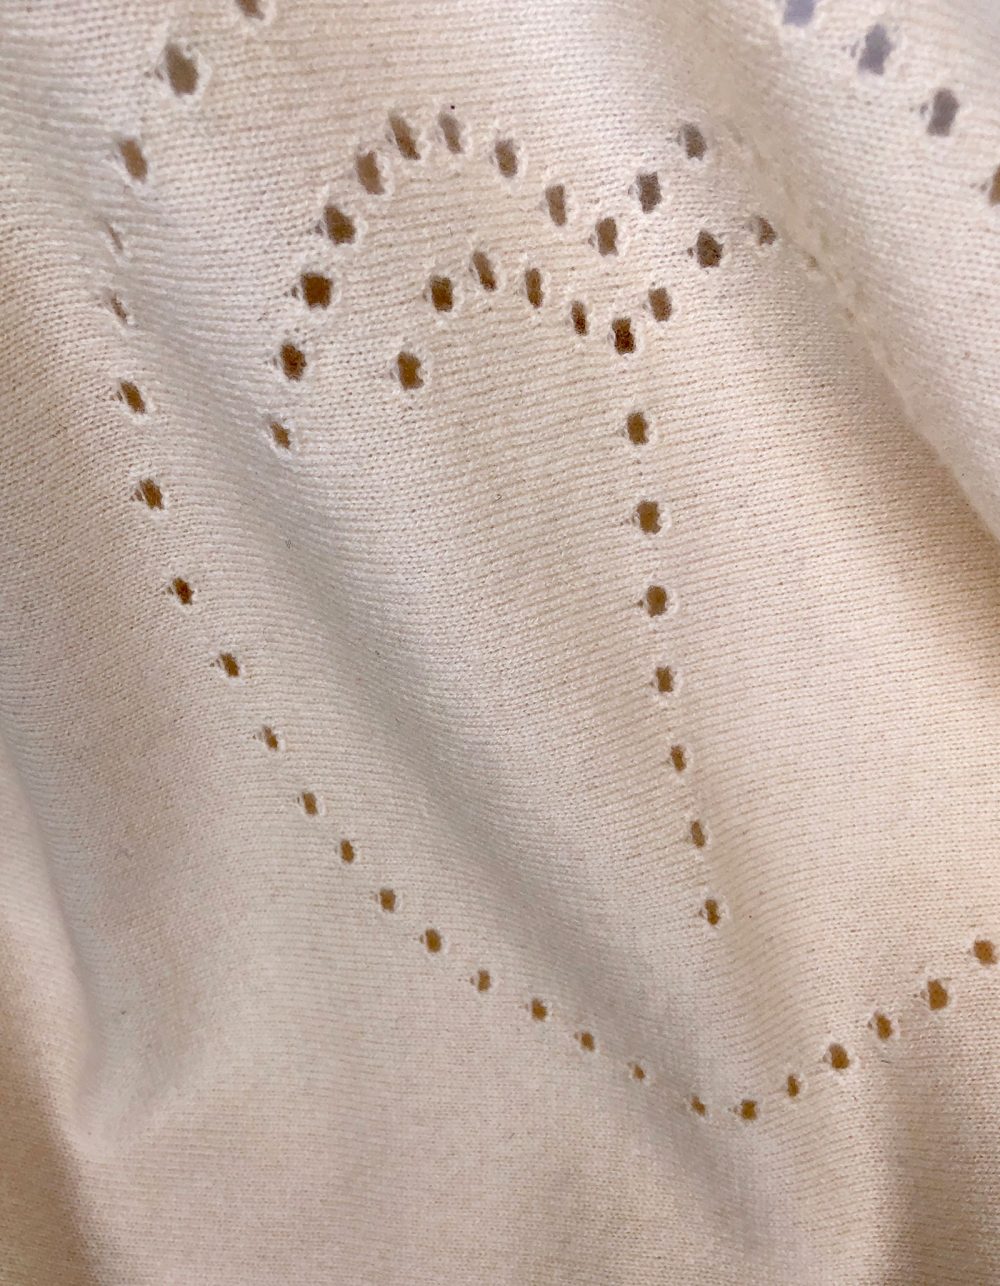 Close up detail of a cashmere palm jumper in cream, part of the malin darlin designer cashmere range of knitwear.